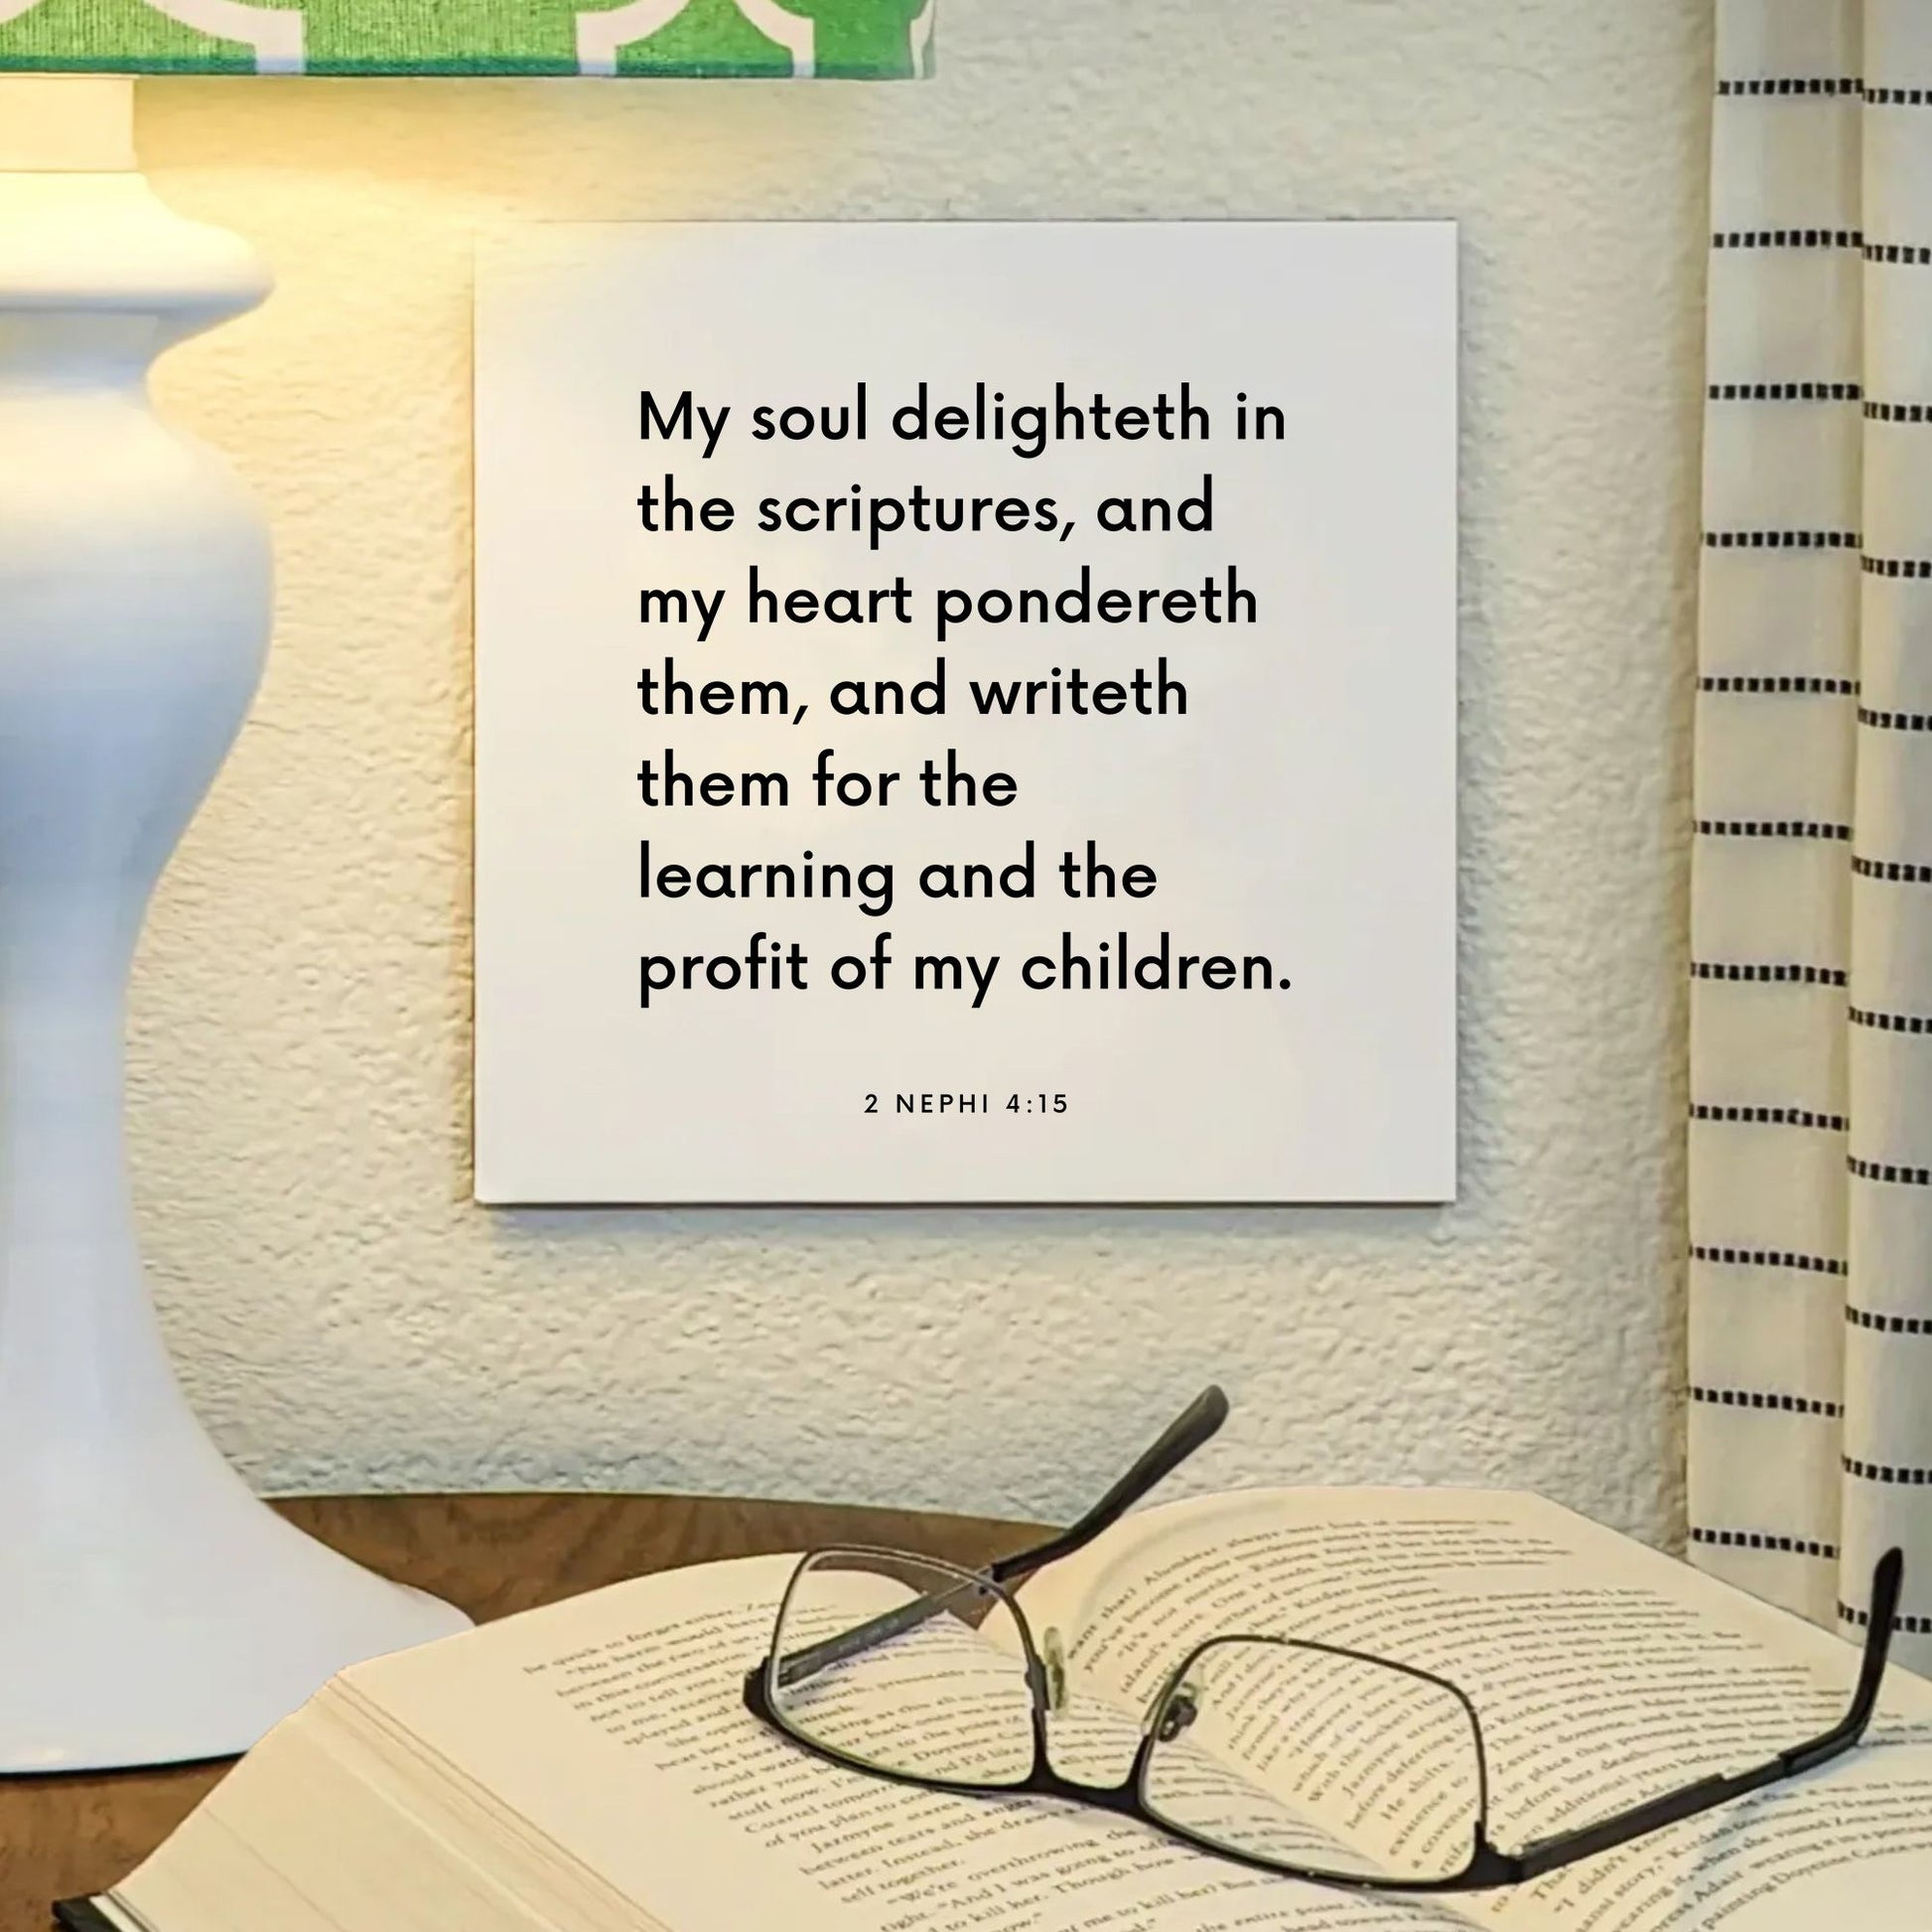 Lamp mouting of the scripture tile for 2 Nephi 4:15 - "My soul delighteth in the scriptures"